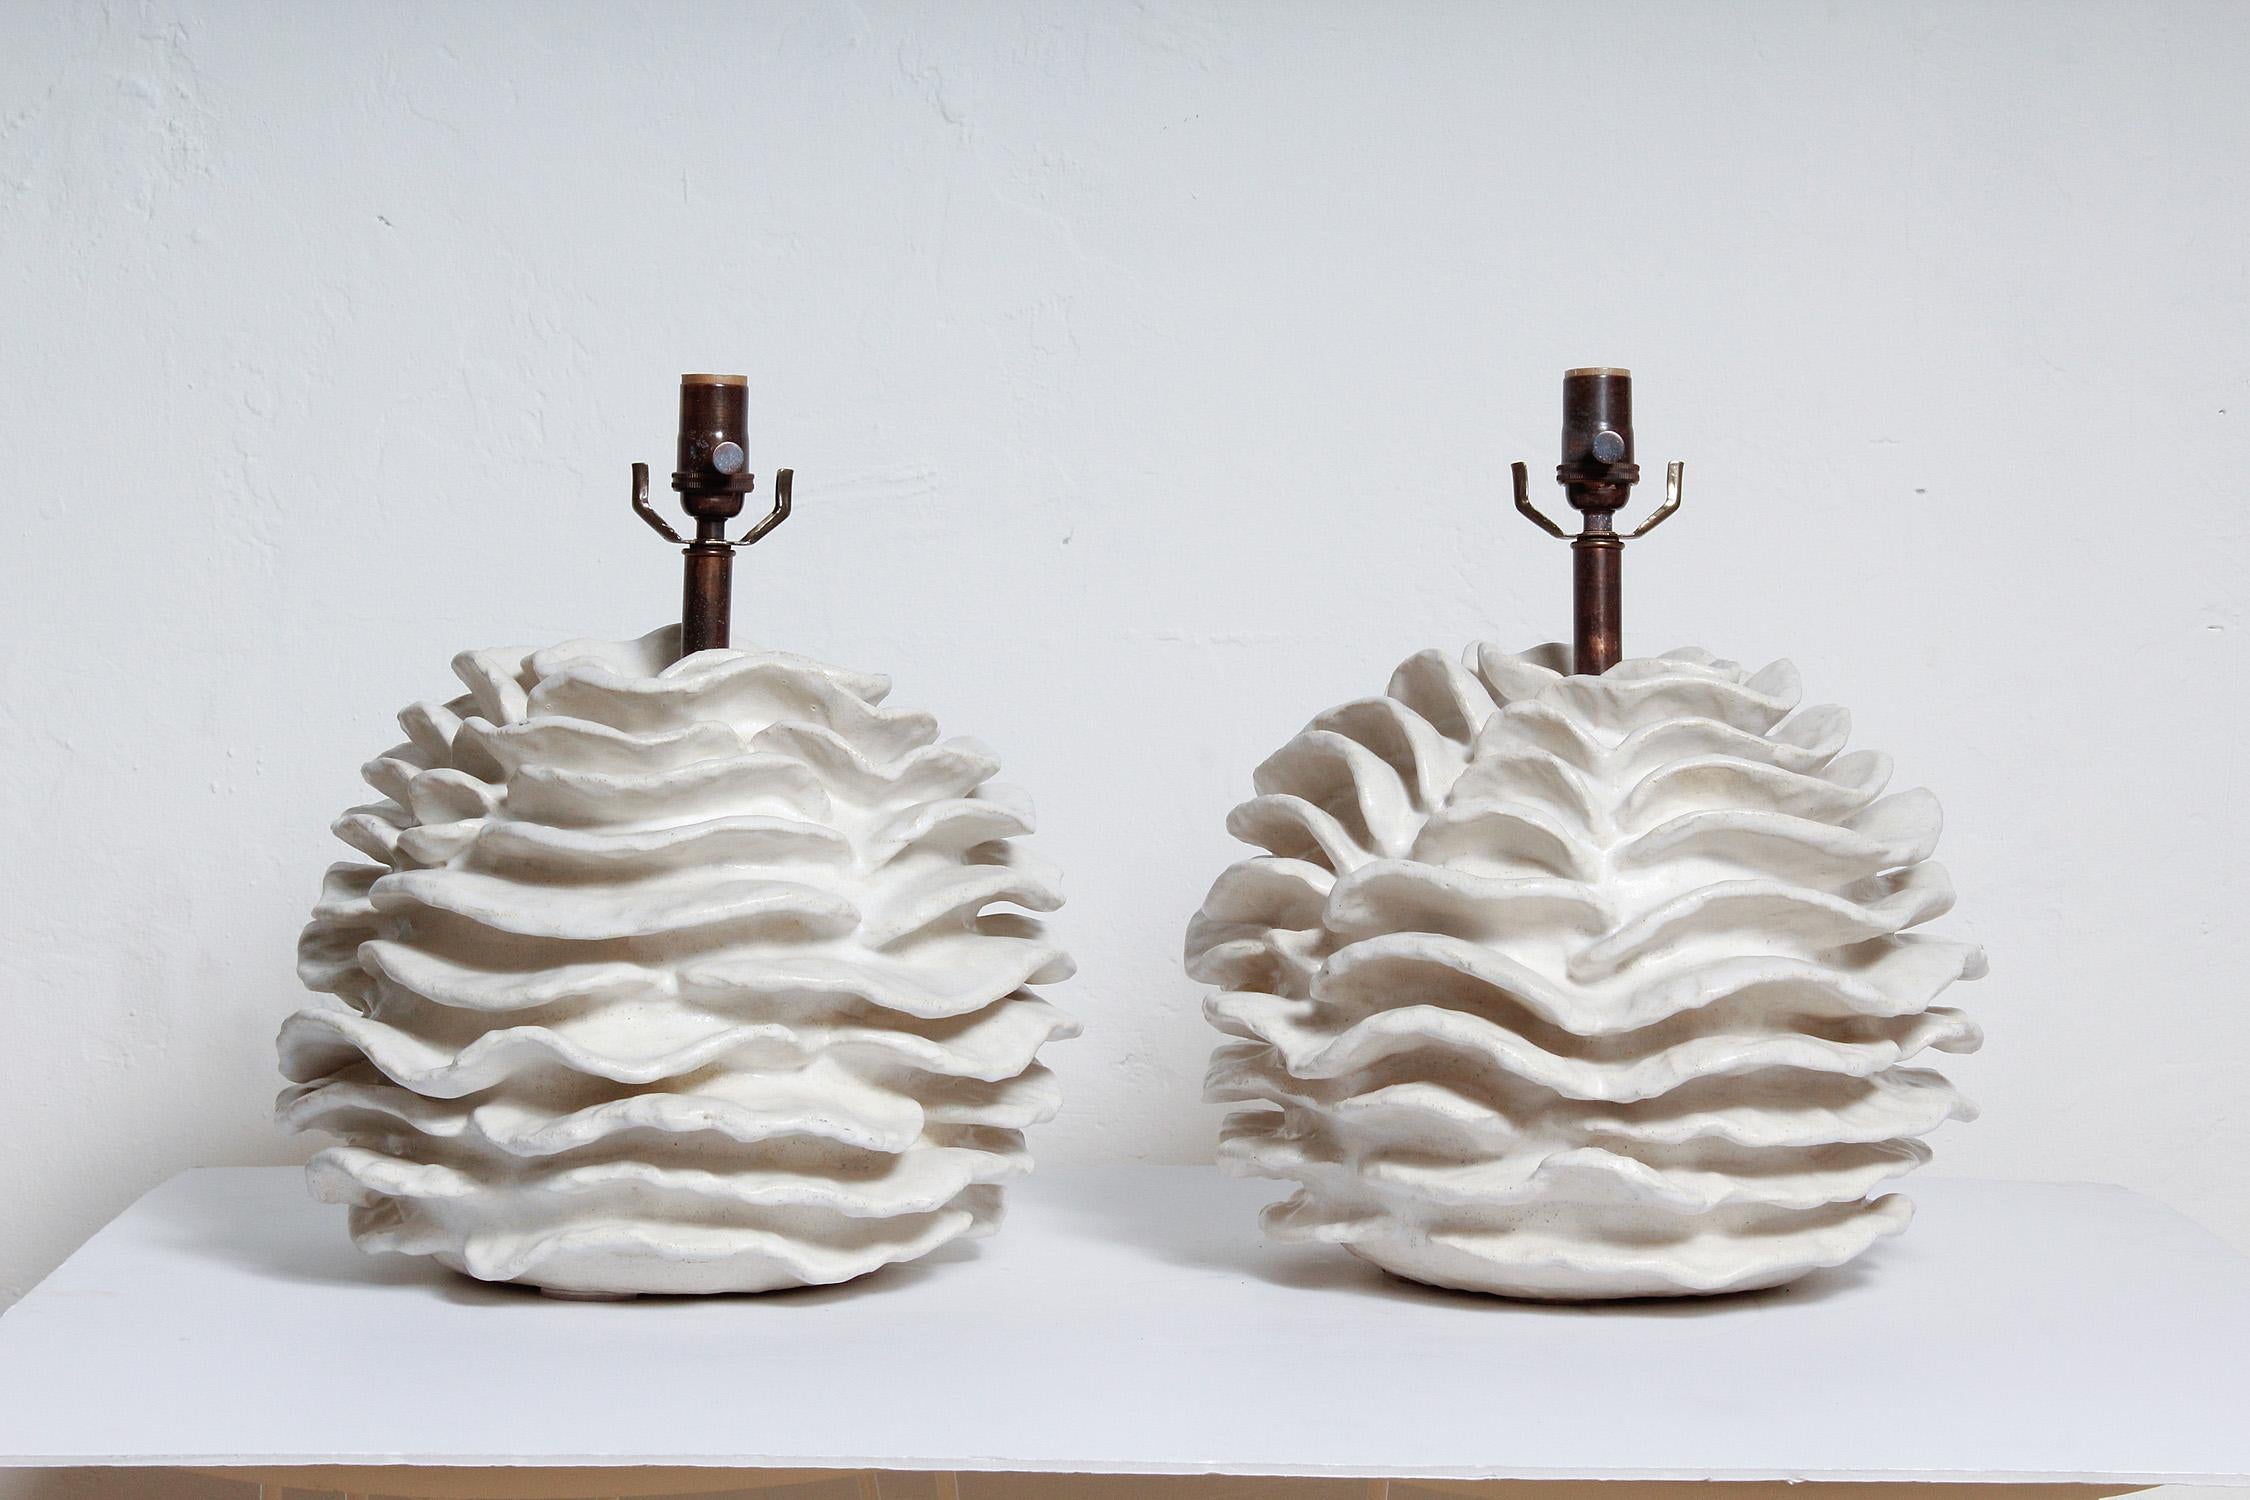 Pair of custom white glazed stoneware lamps, handcrafted exclusively for Stripe by ceramicist Priscilla Hollingsworth. Antiqued brass hardware with white fabric cords.